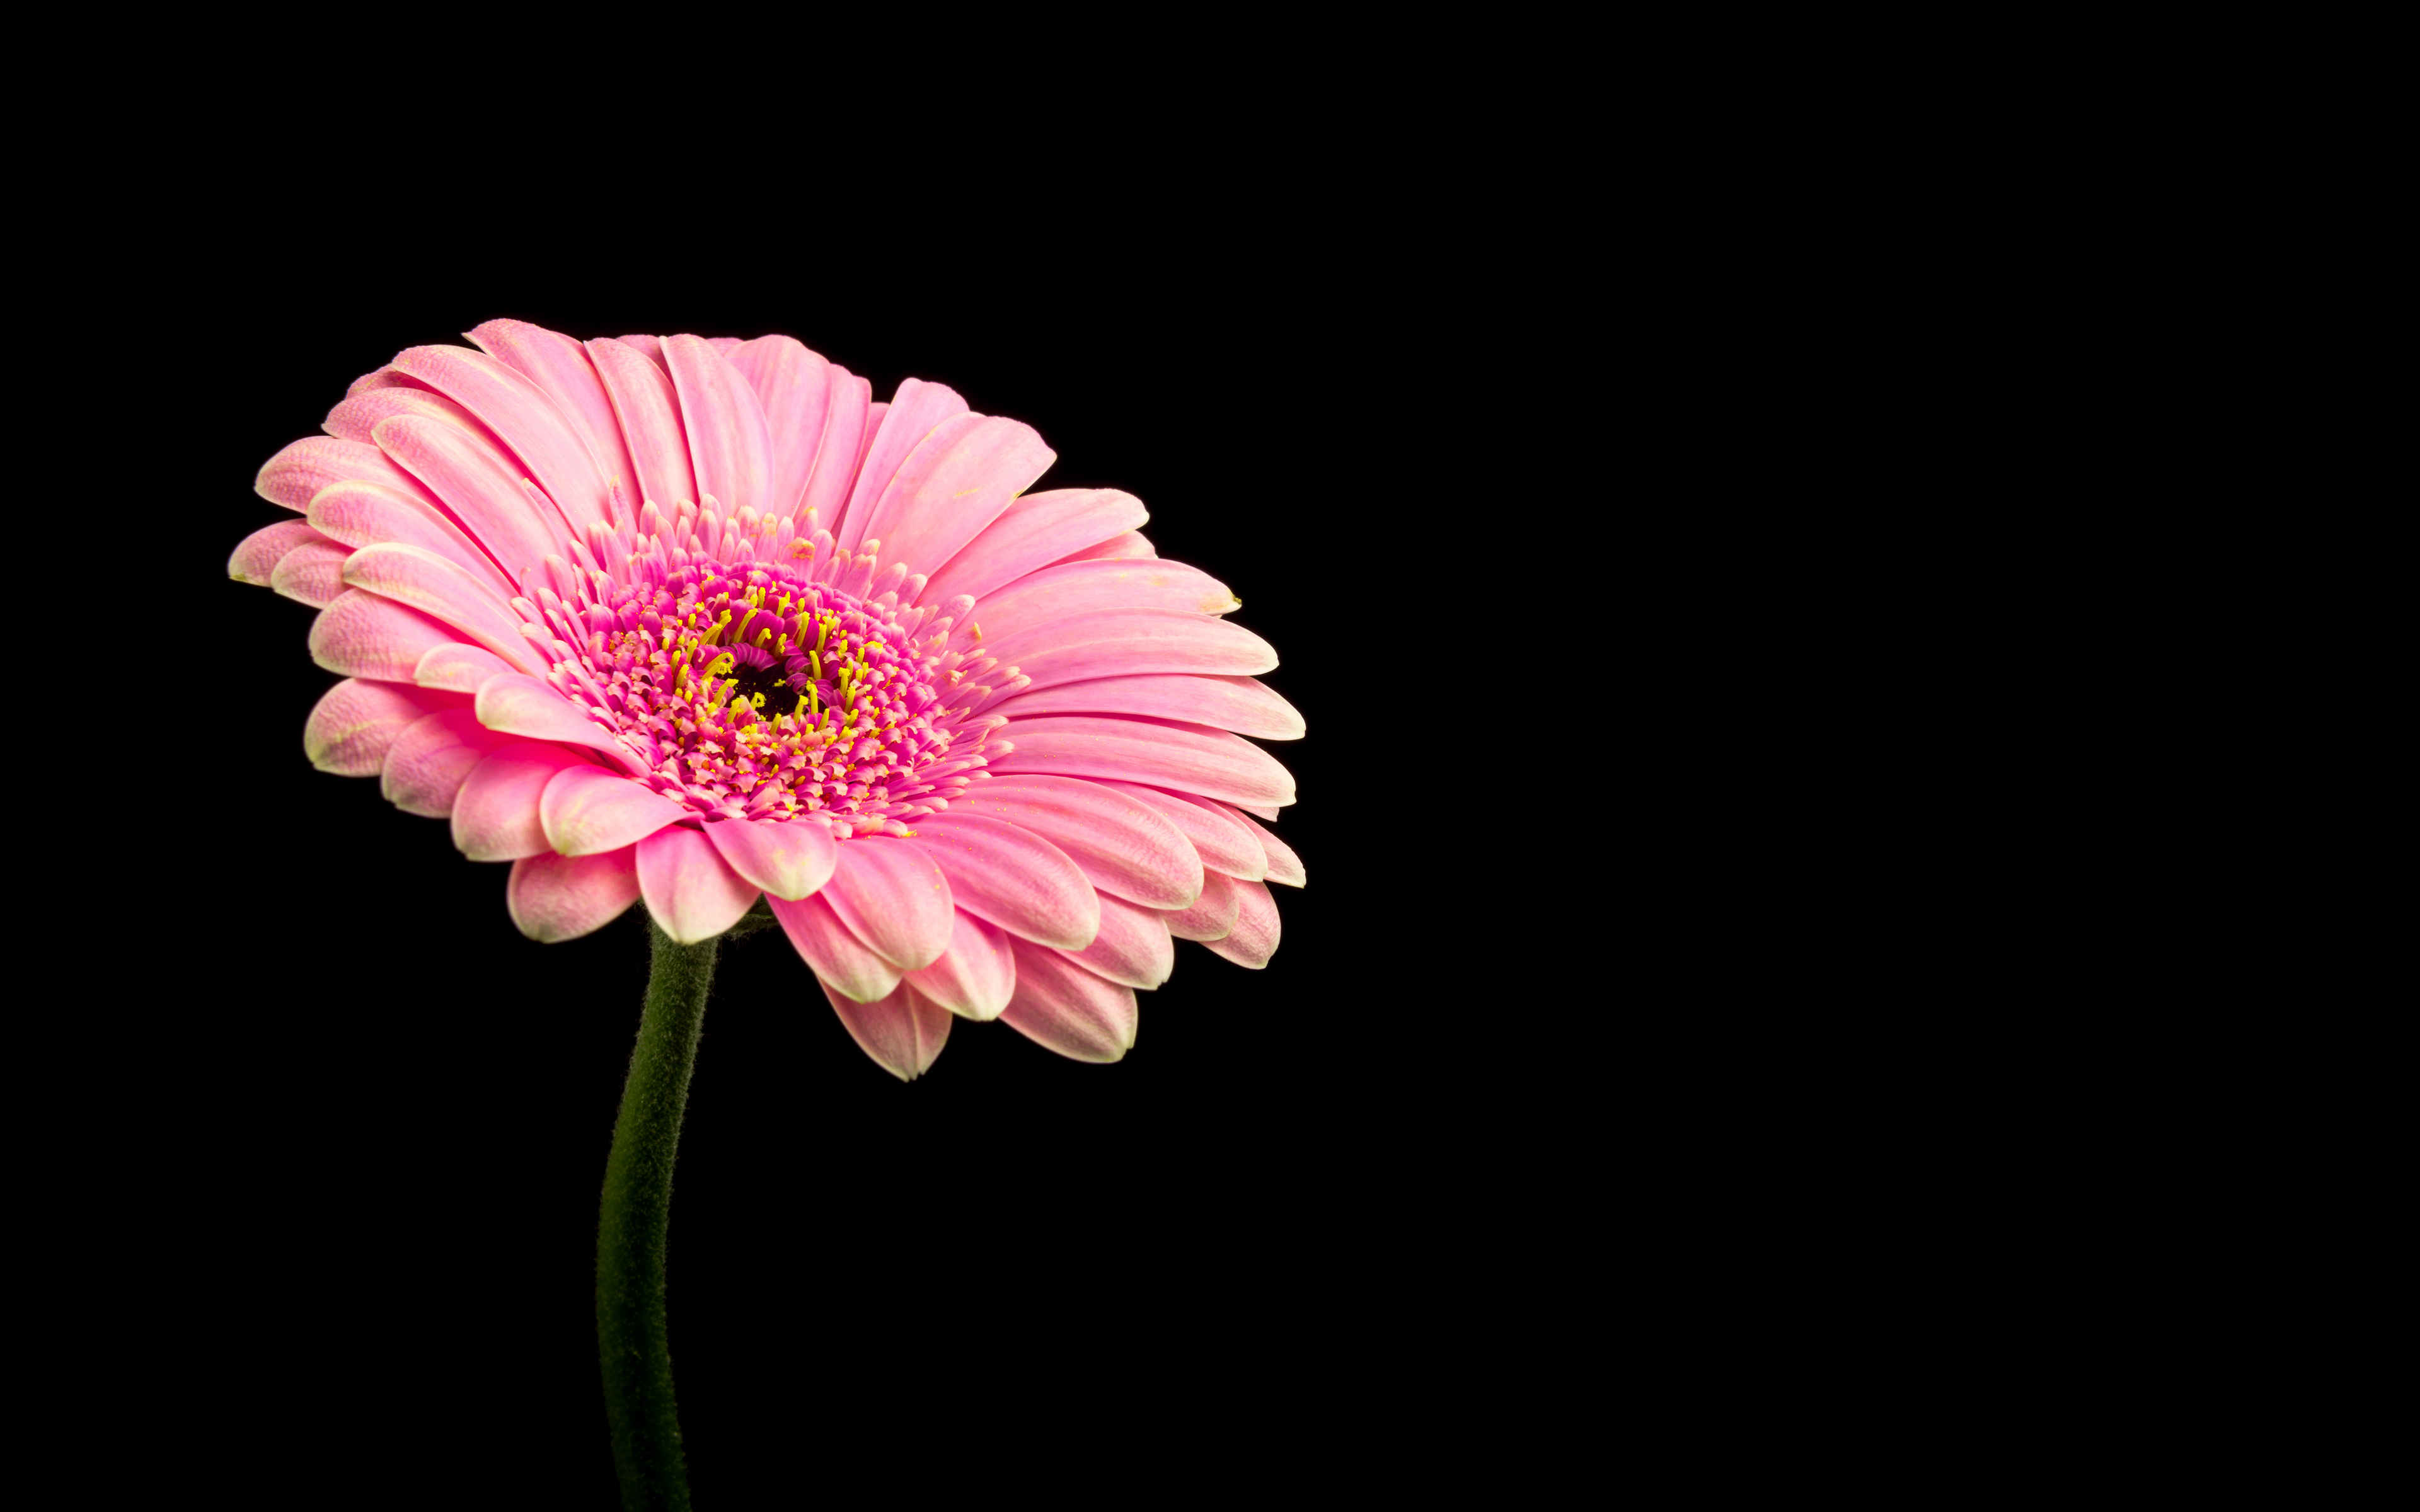 Download wallpaper 1125x2436 close up pink daisy bloom iphone x  1125x2436 hd background 2708